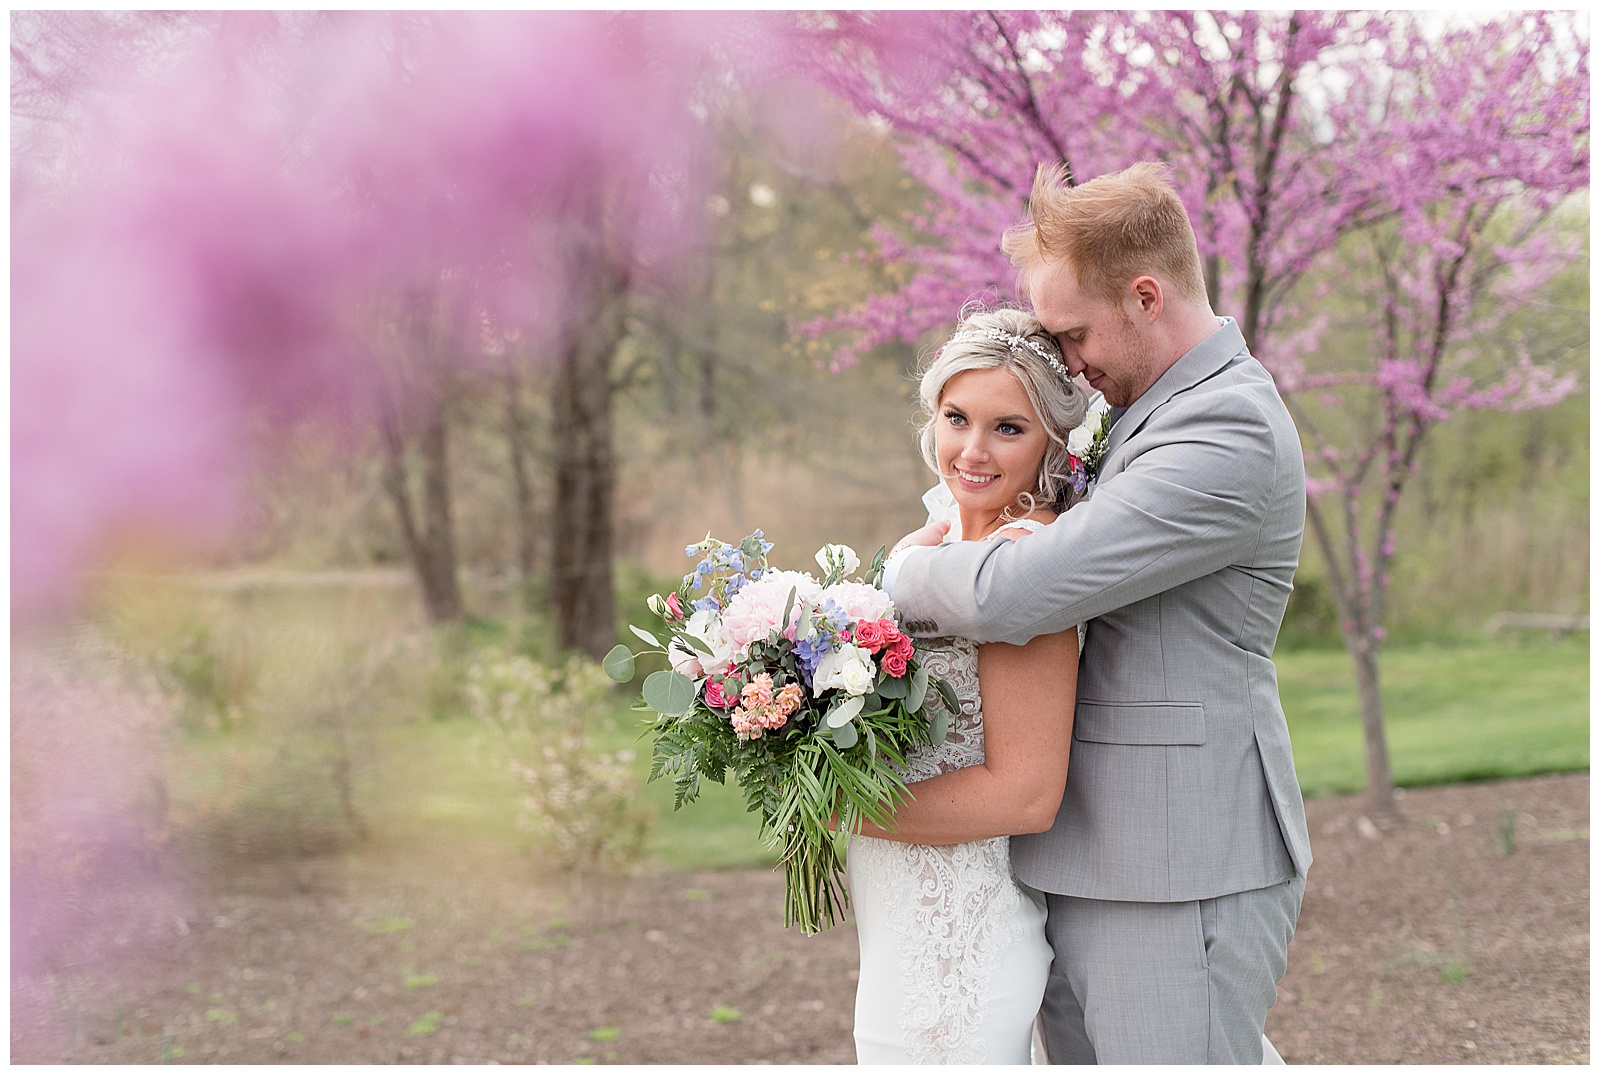 groom standing behind bride hugging her as she smiles at the camera holding bouquet by pink blooming trees